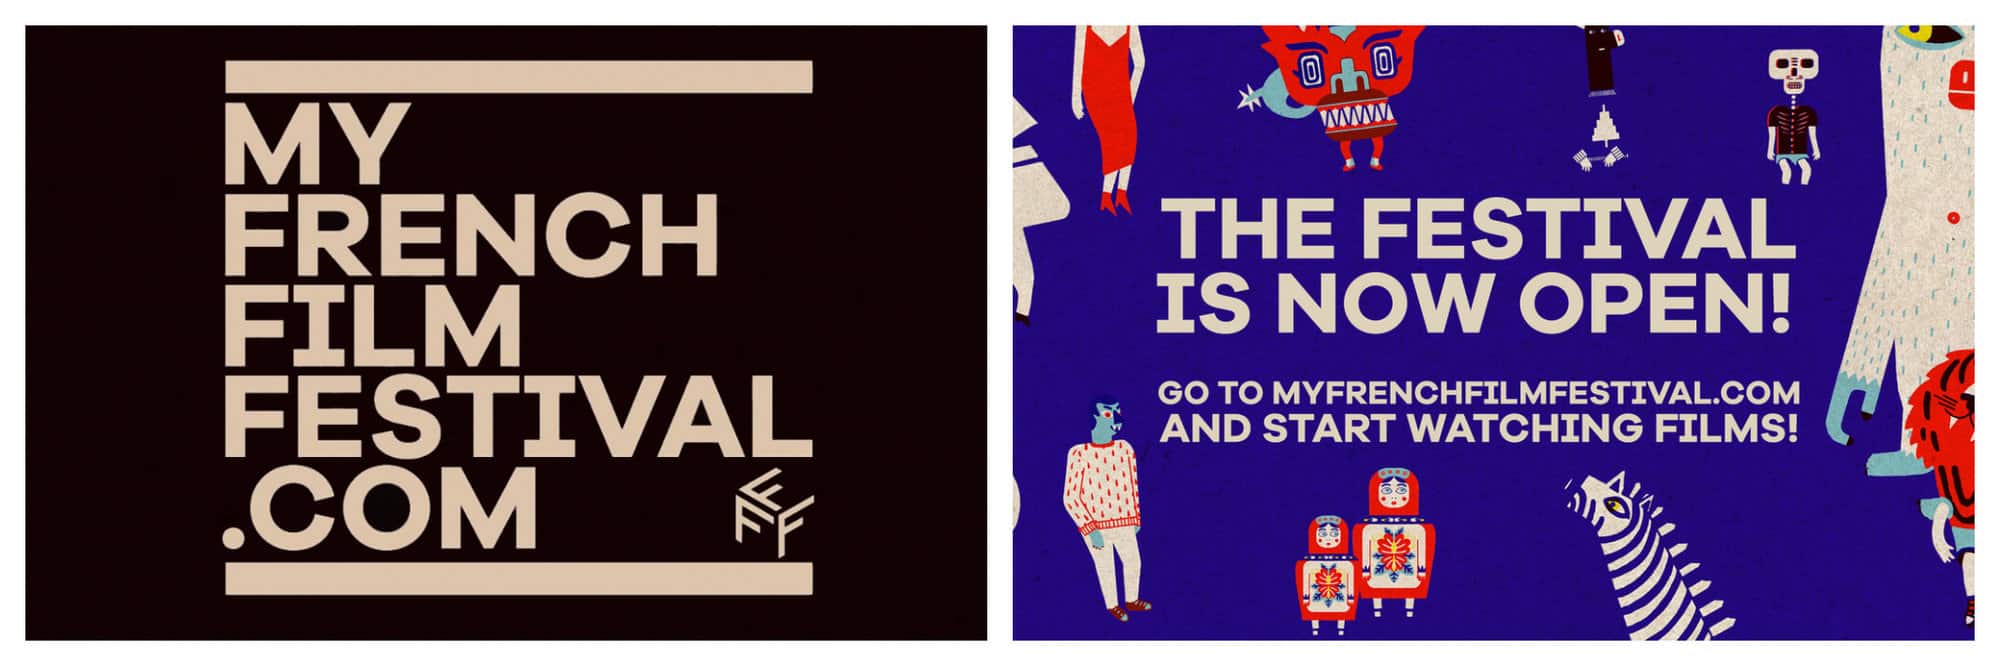 Left: The logo of MyFrenchFilmFestival.com in black background and beige text. Right: A banner advertising that the French Film Festival is now open and says "go to myfrenchfilmfestival.com and start watching films!" The text is in beige, the background in blue, and filled with fun sketches such as a zebra, a man with a head of a horse, and 2 russian dolls.